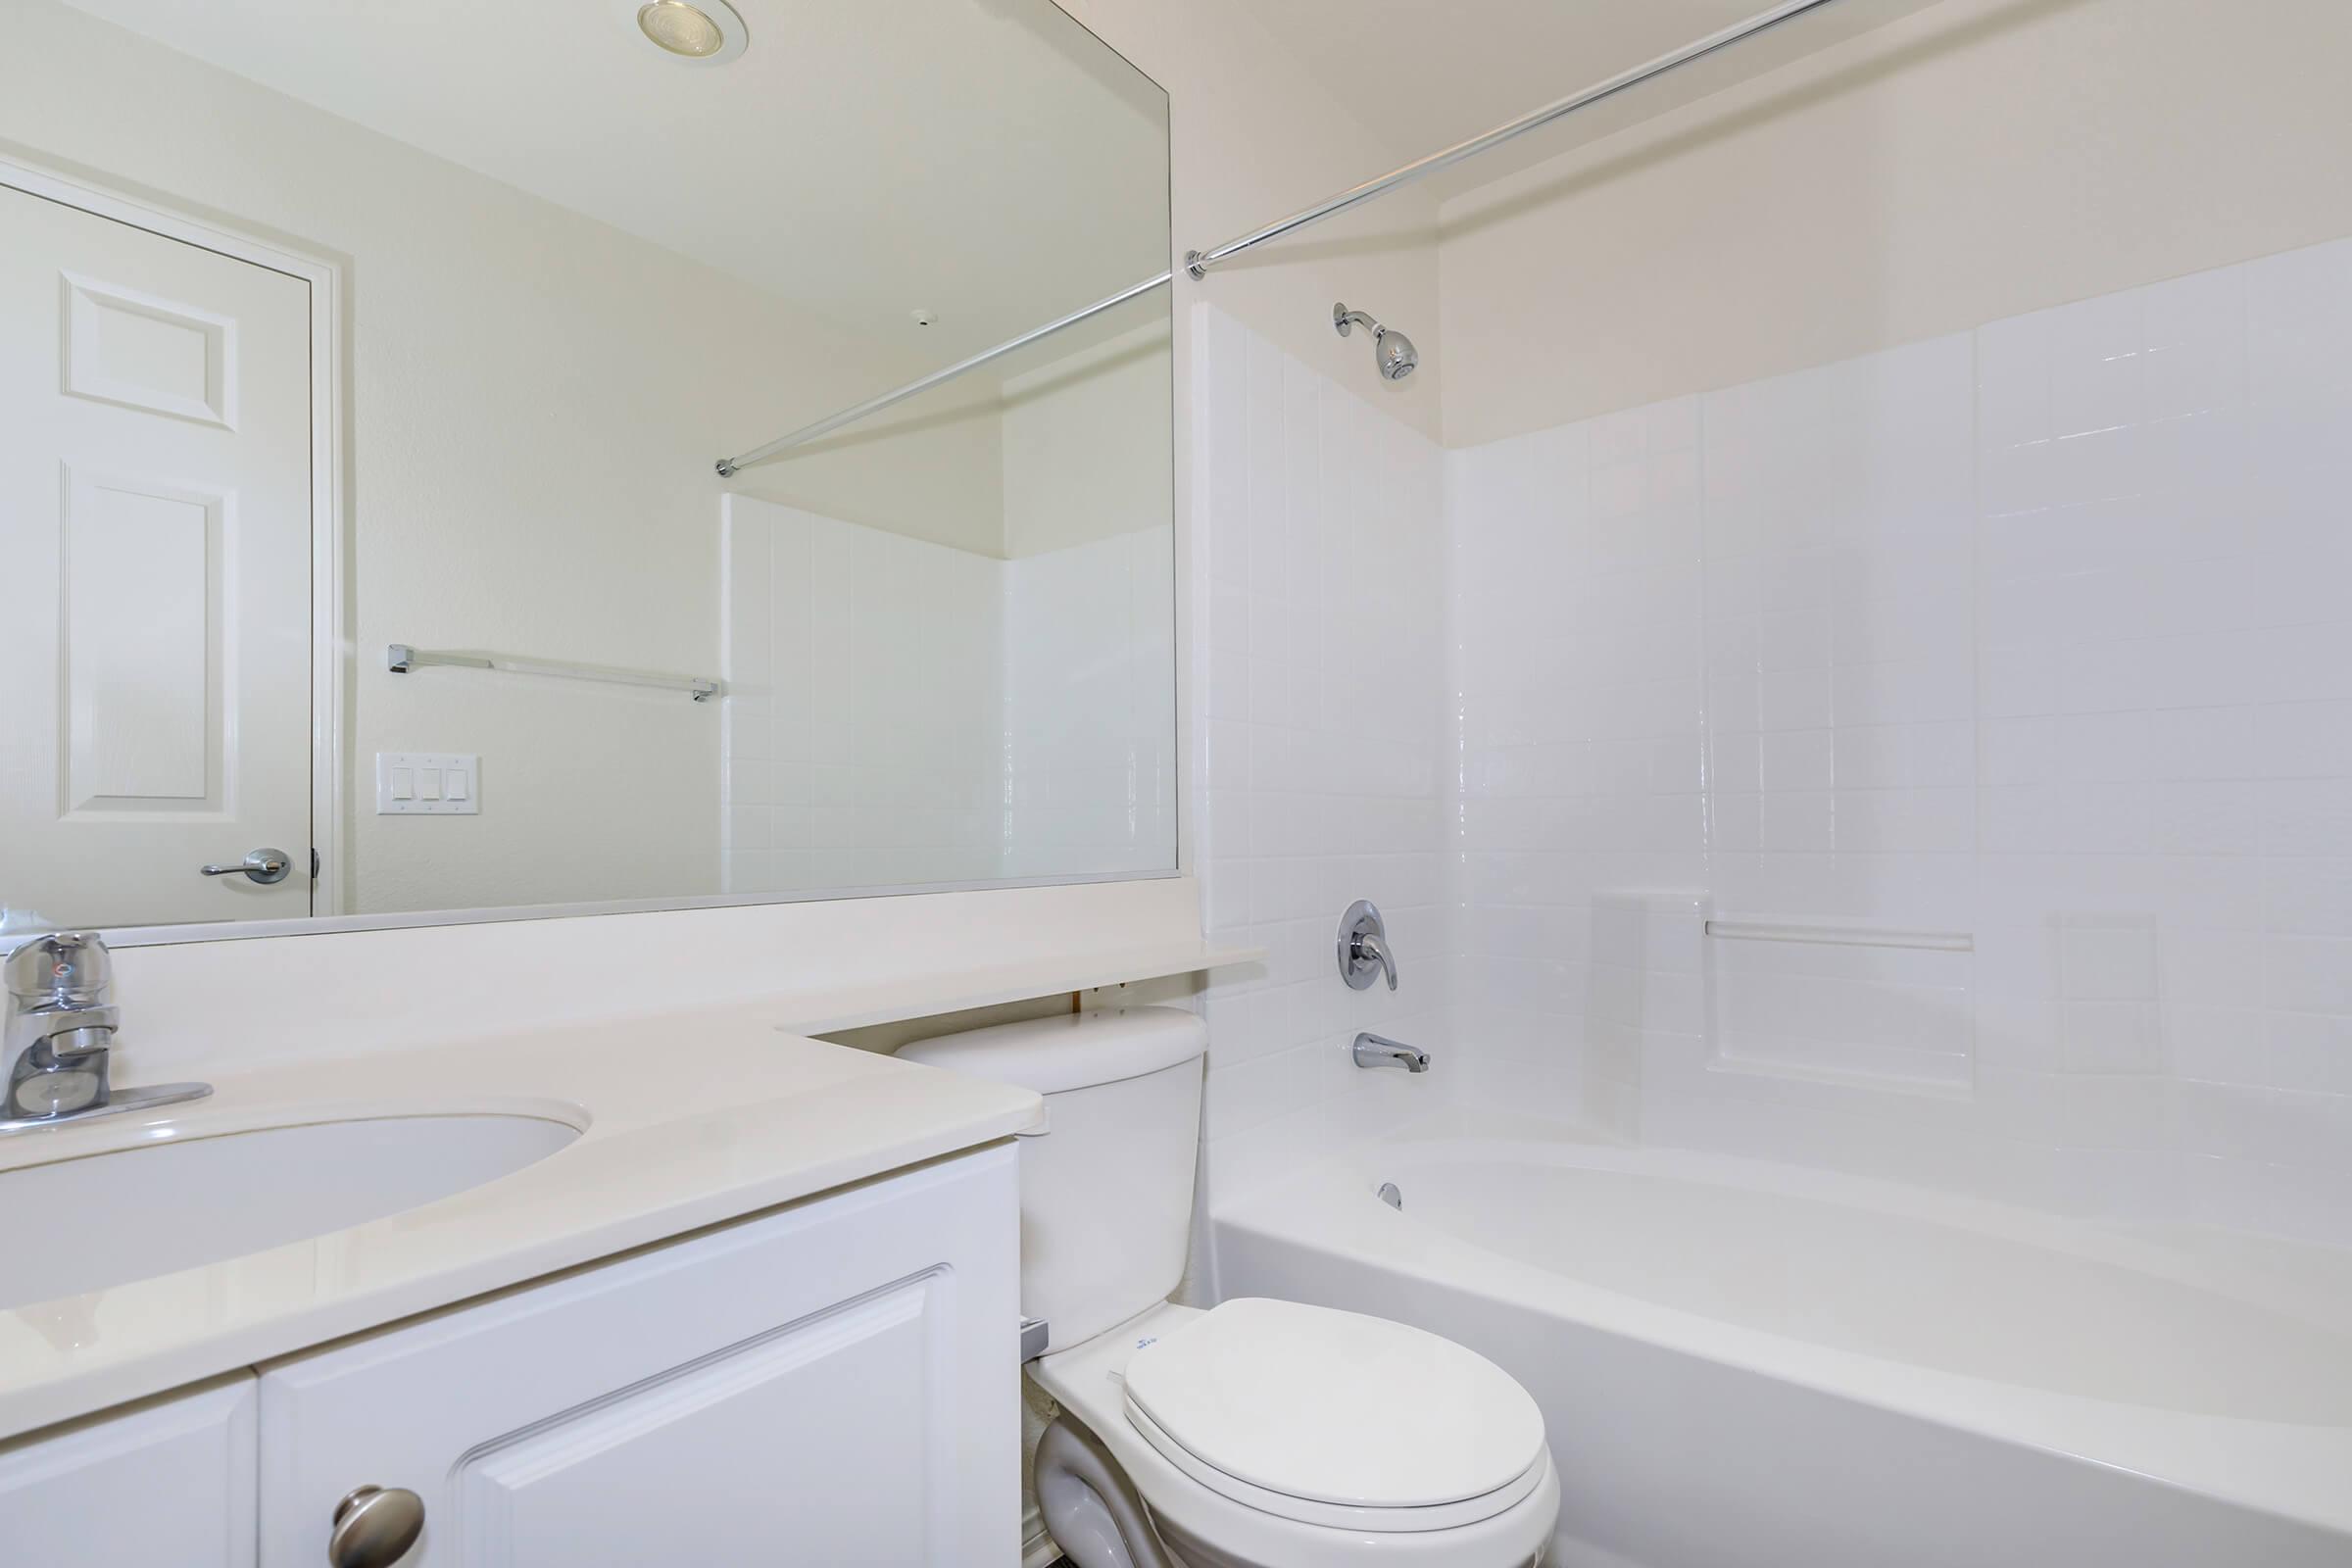 Laurel Glen Apartment Homes has all in-one shower and bath combos